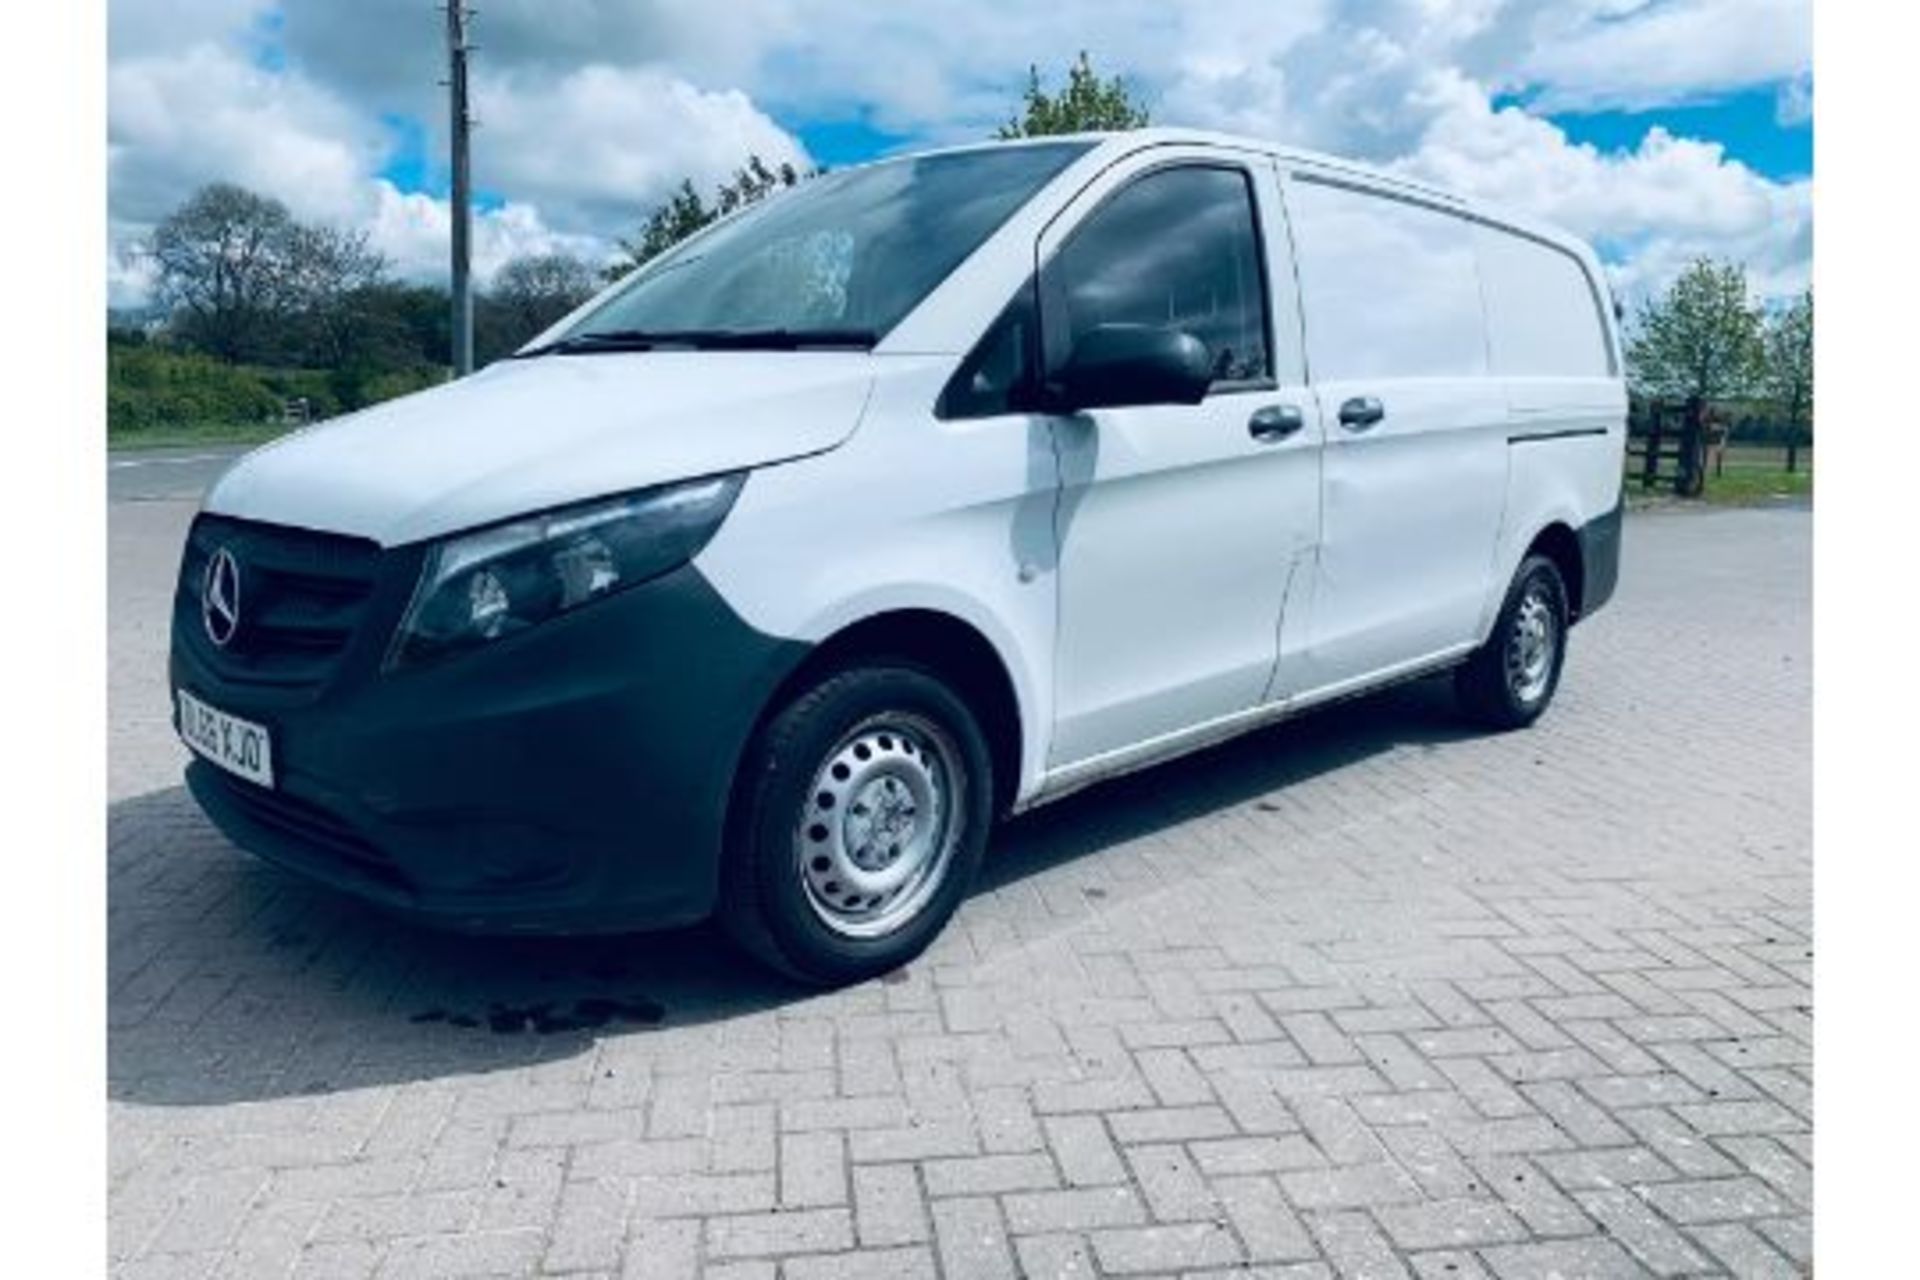 (RESERVE MET) Mercedes Vito CDI Lwb - 2017 Model -Euro 6 -Only 74k Miles -(New Shape) ULEZ Compliant - Image 2 of 15